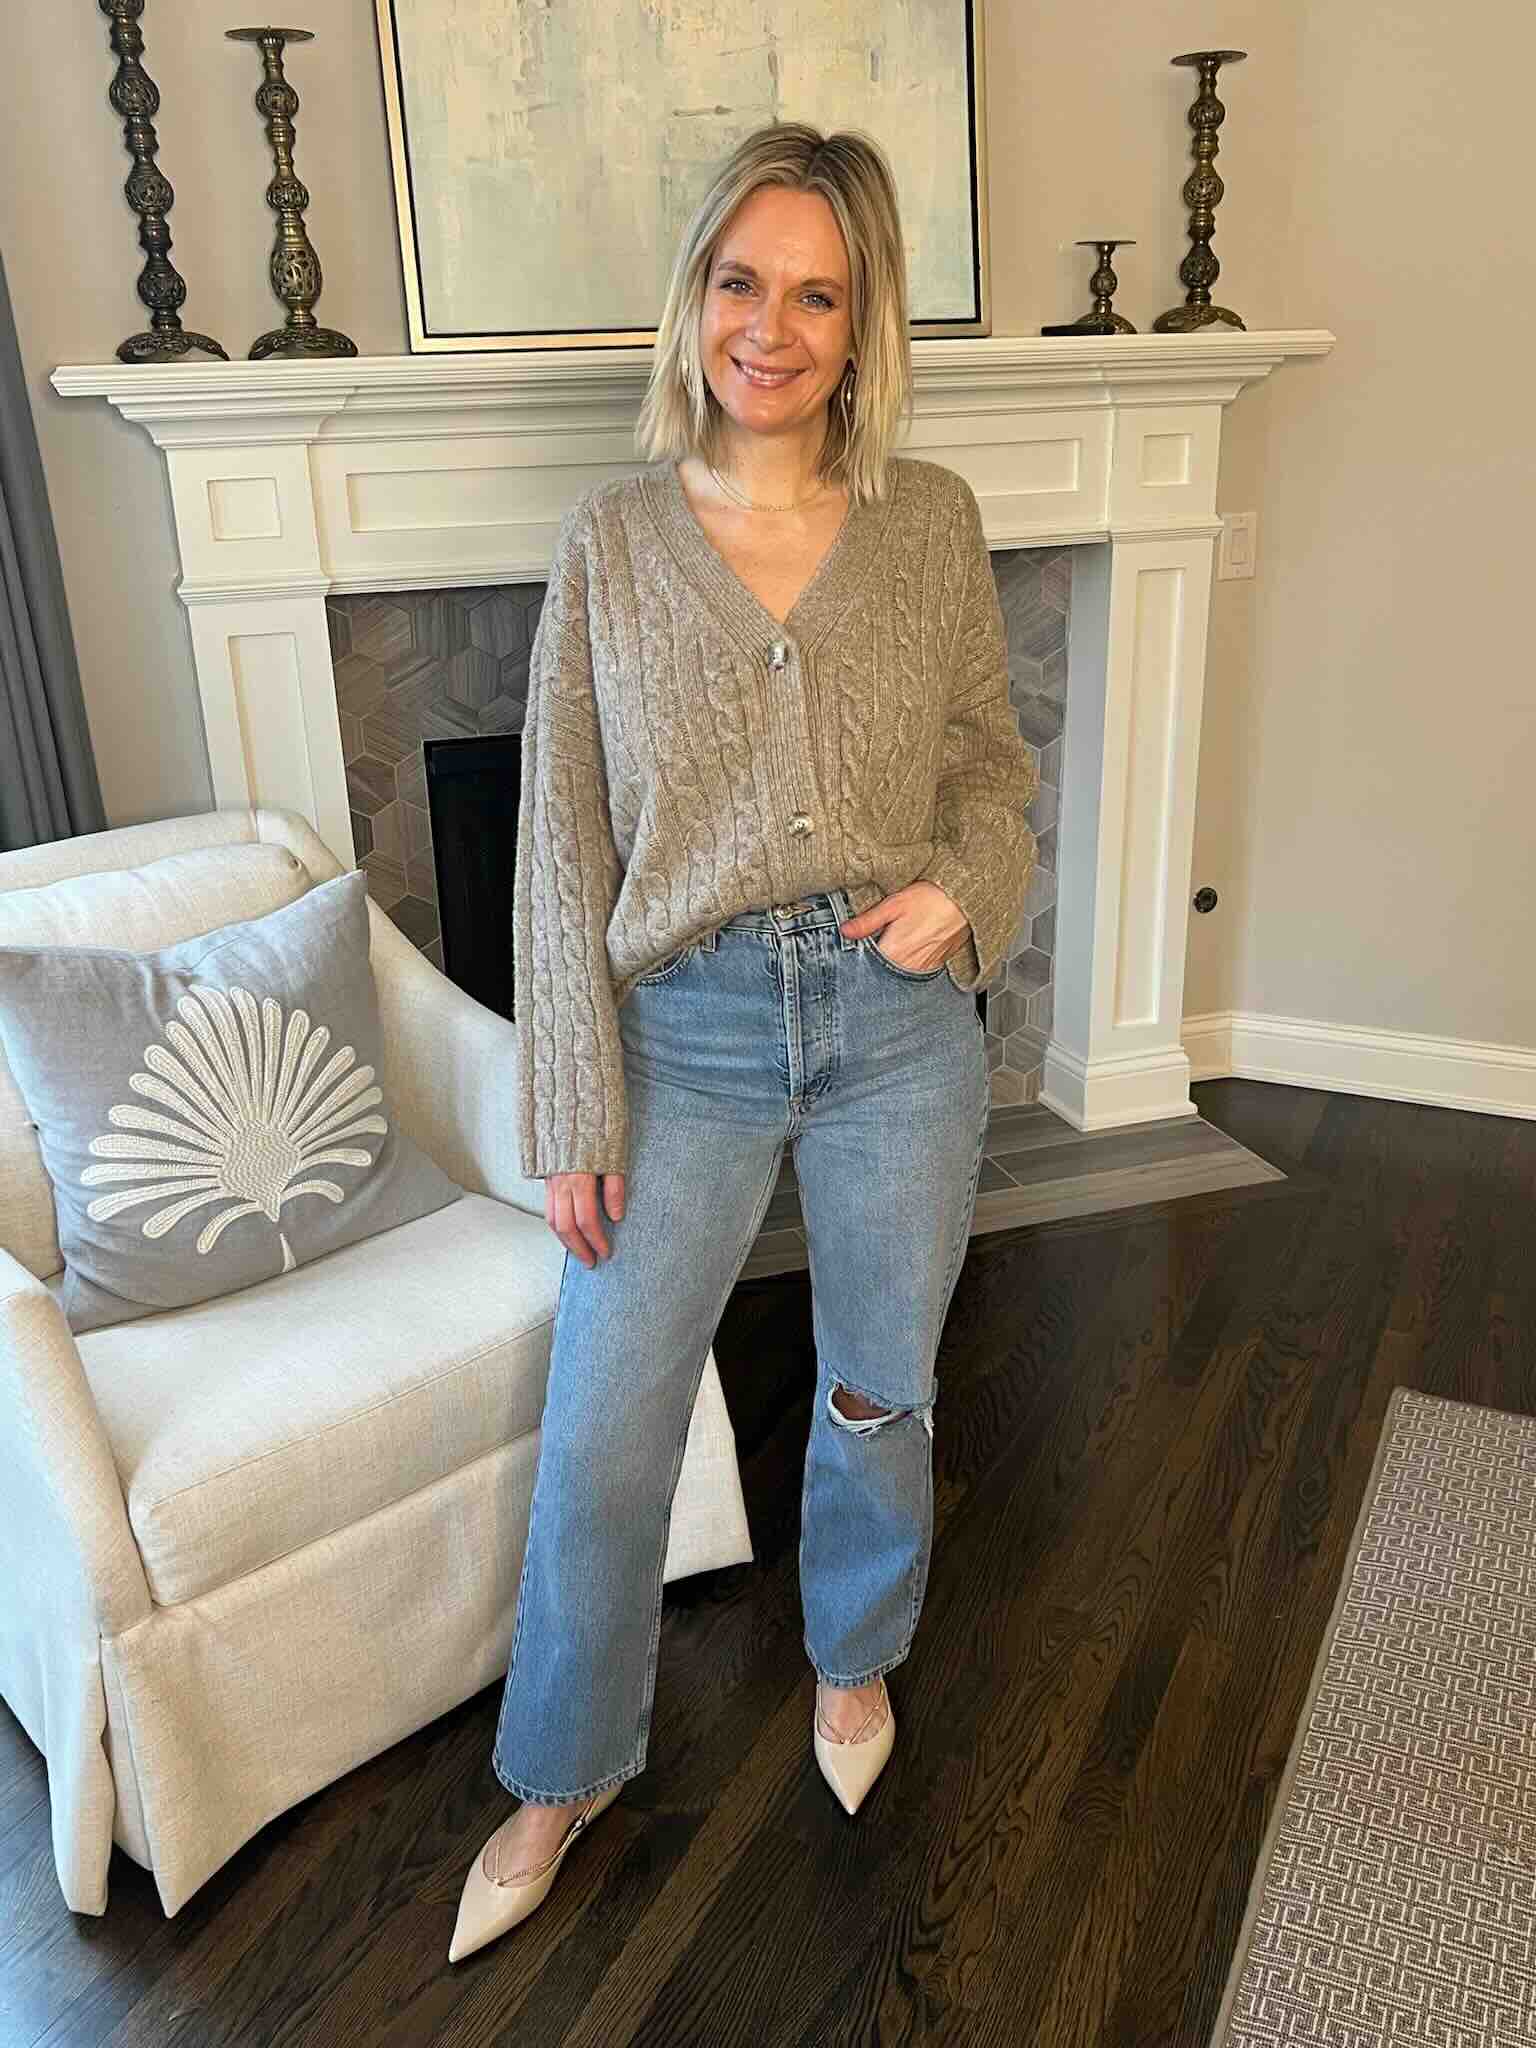 How To Wear Wide Leg Jeans Cardigan & Wide Leg Jeans how to wear flats in winter how to to wear flats with wide leg jeans how to style distressed jeans how to wear a cardigan with jeans how to dress your jeans up casual winter outfits style tips for wide leg jeans